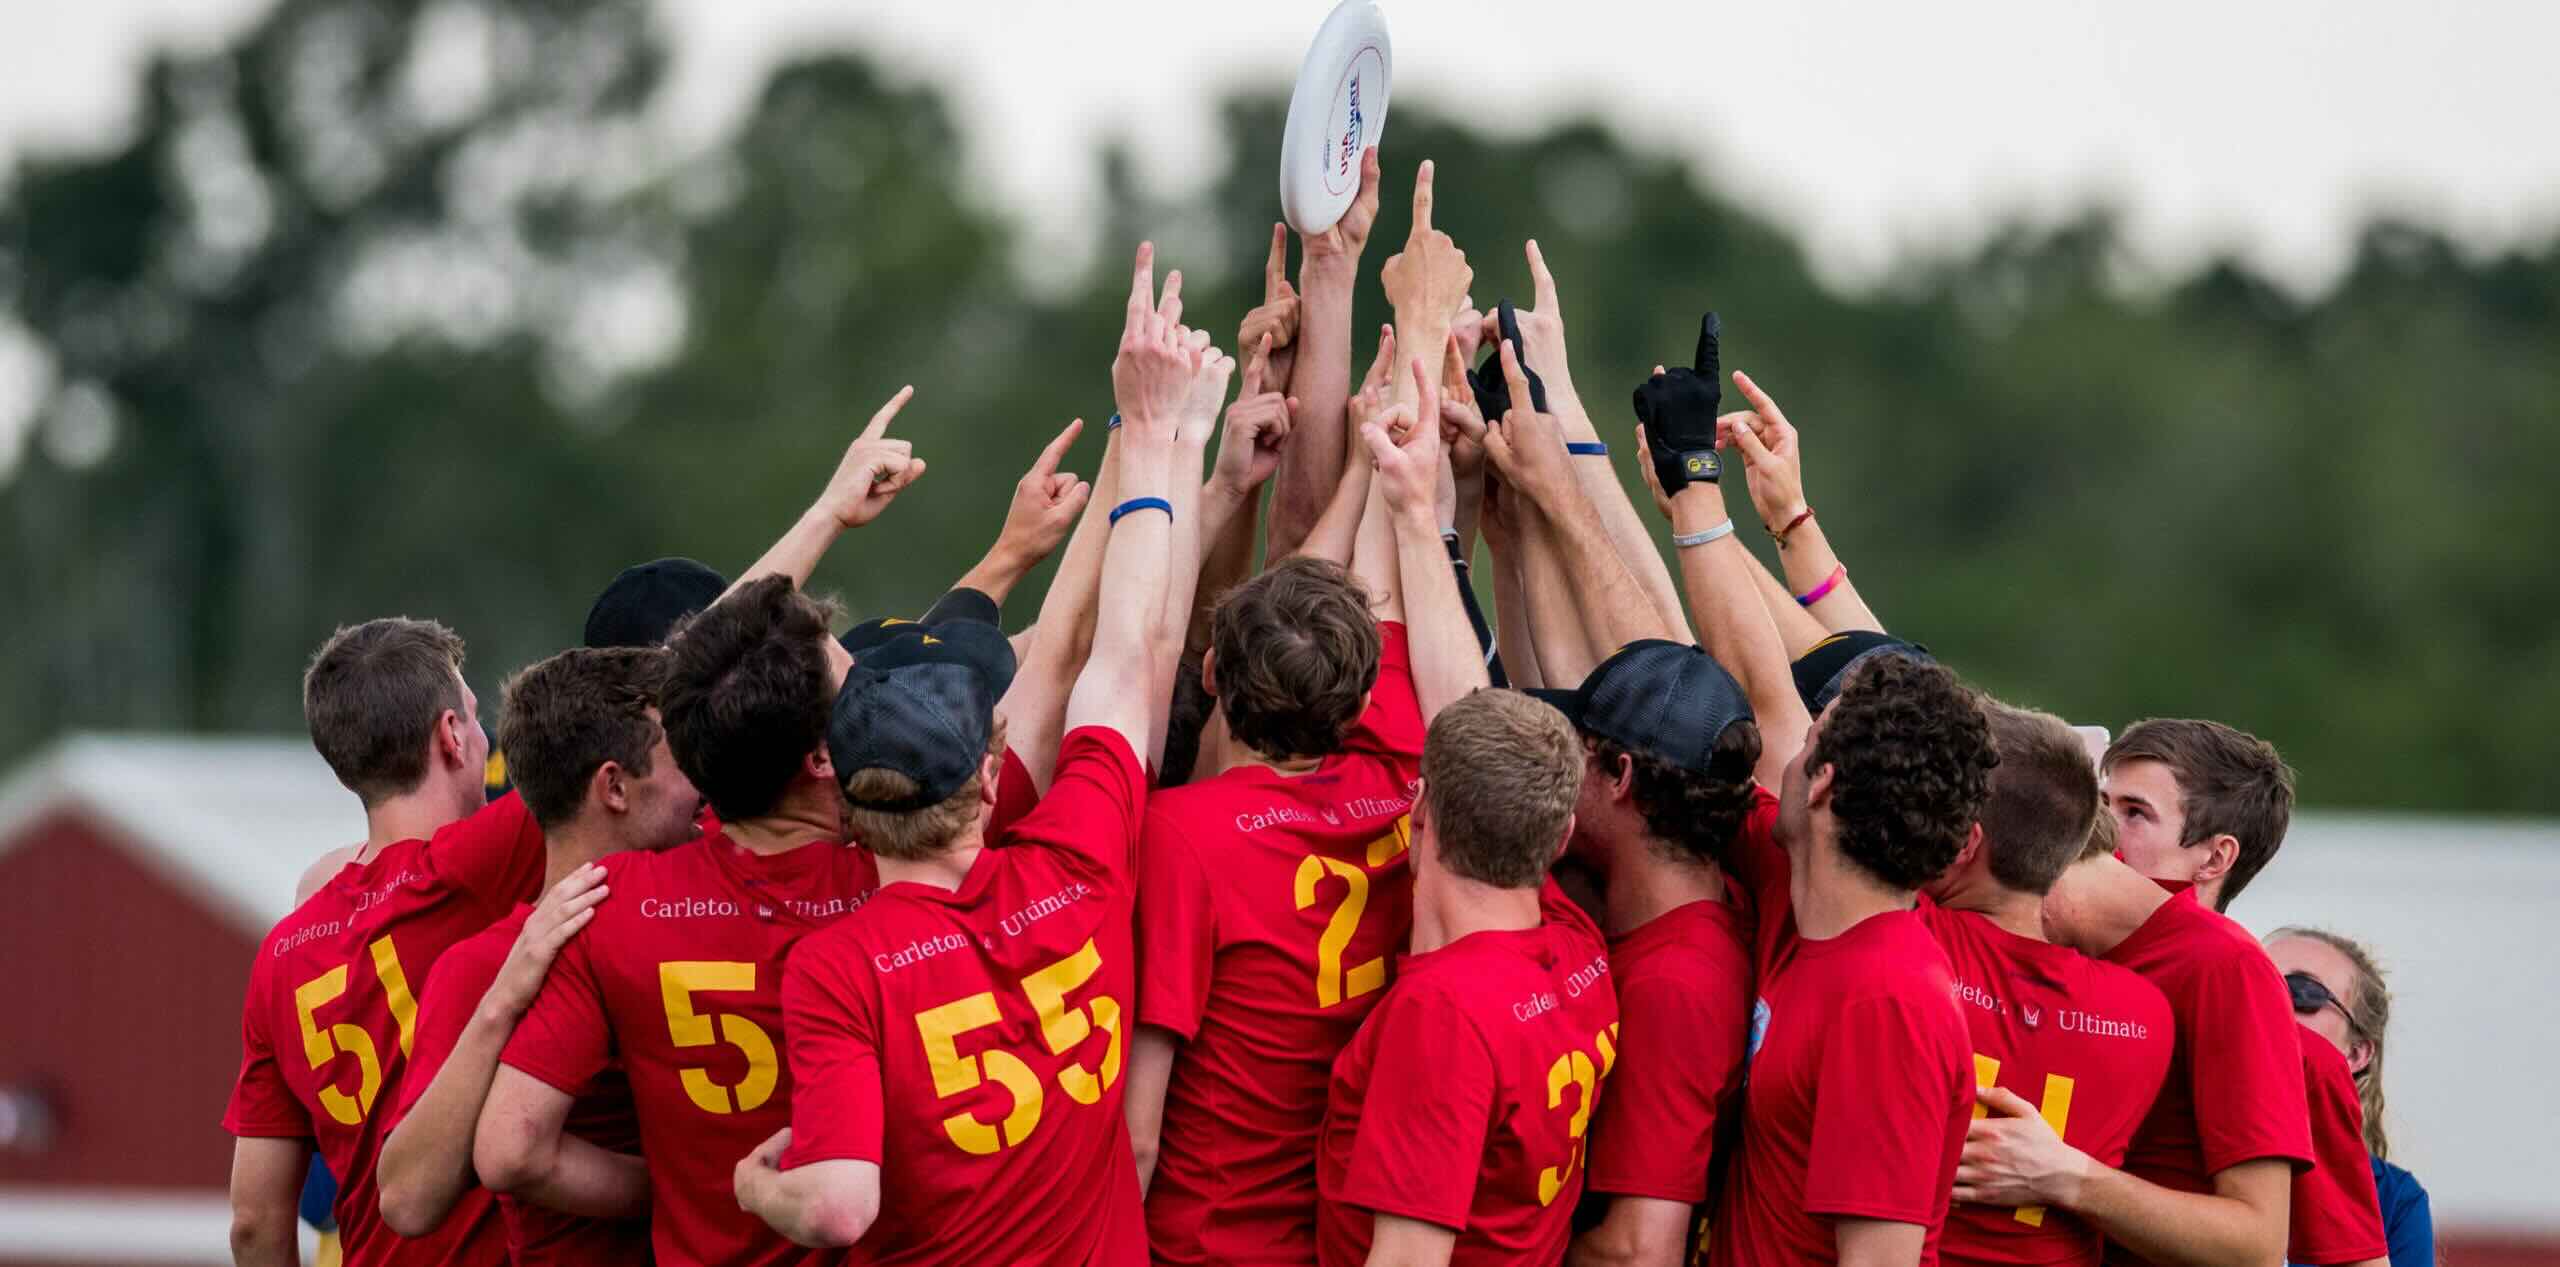 What Colleges Have Ultimate Frisbee Teams?